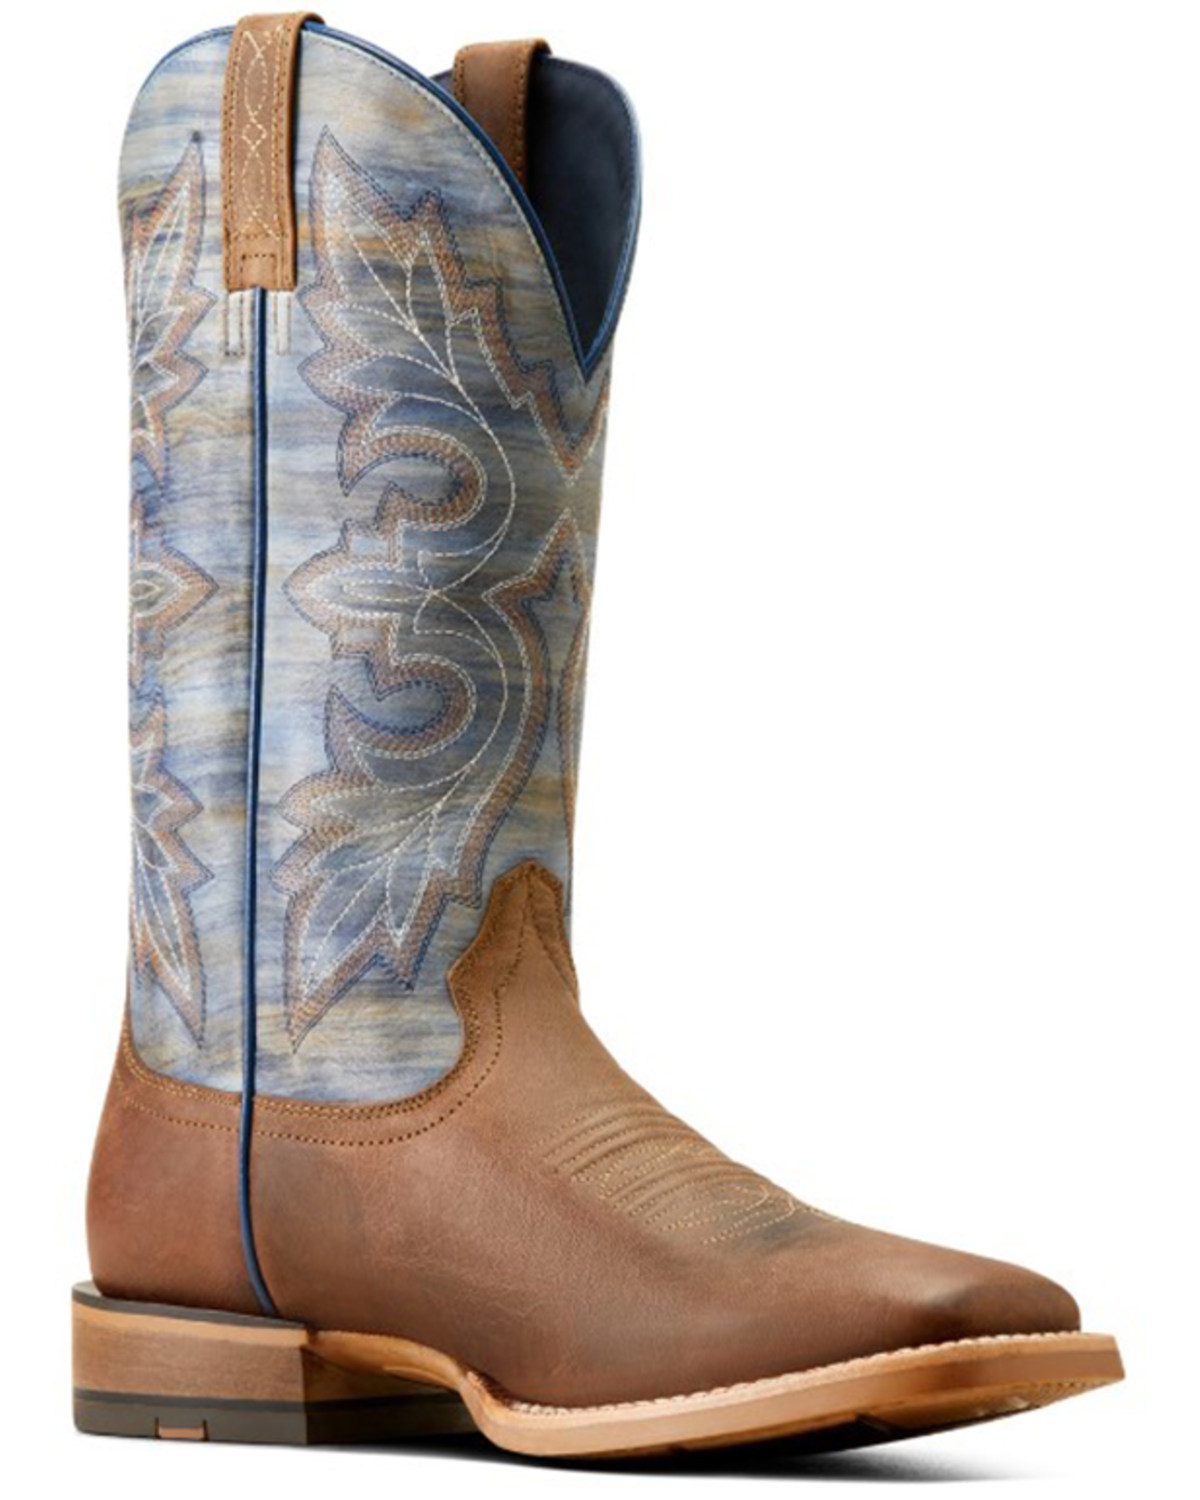 Ariat Men's Standout Performance Western Boots - Broad Square Toe